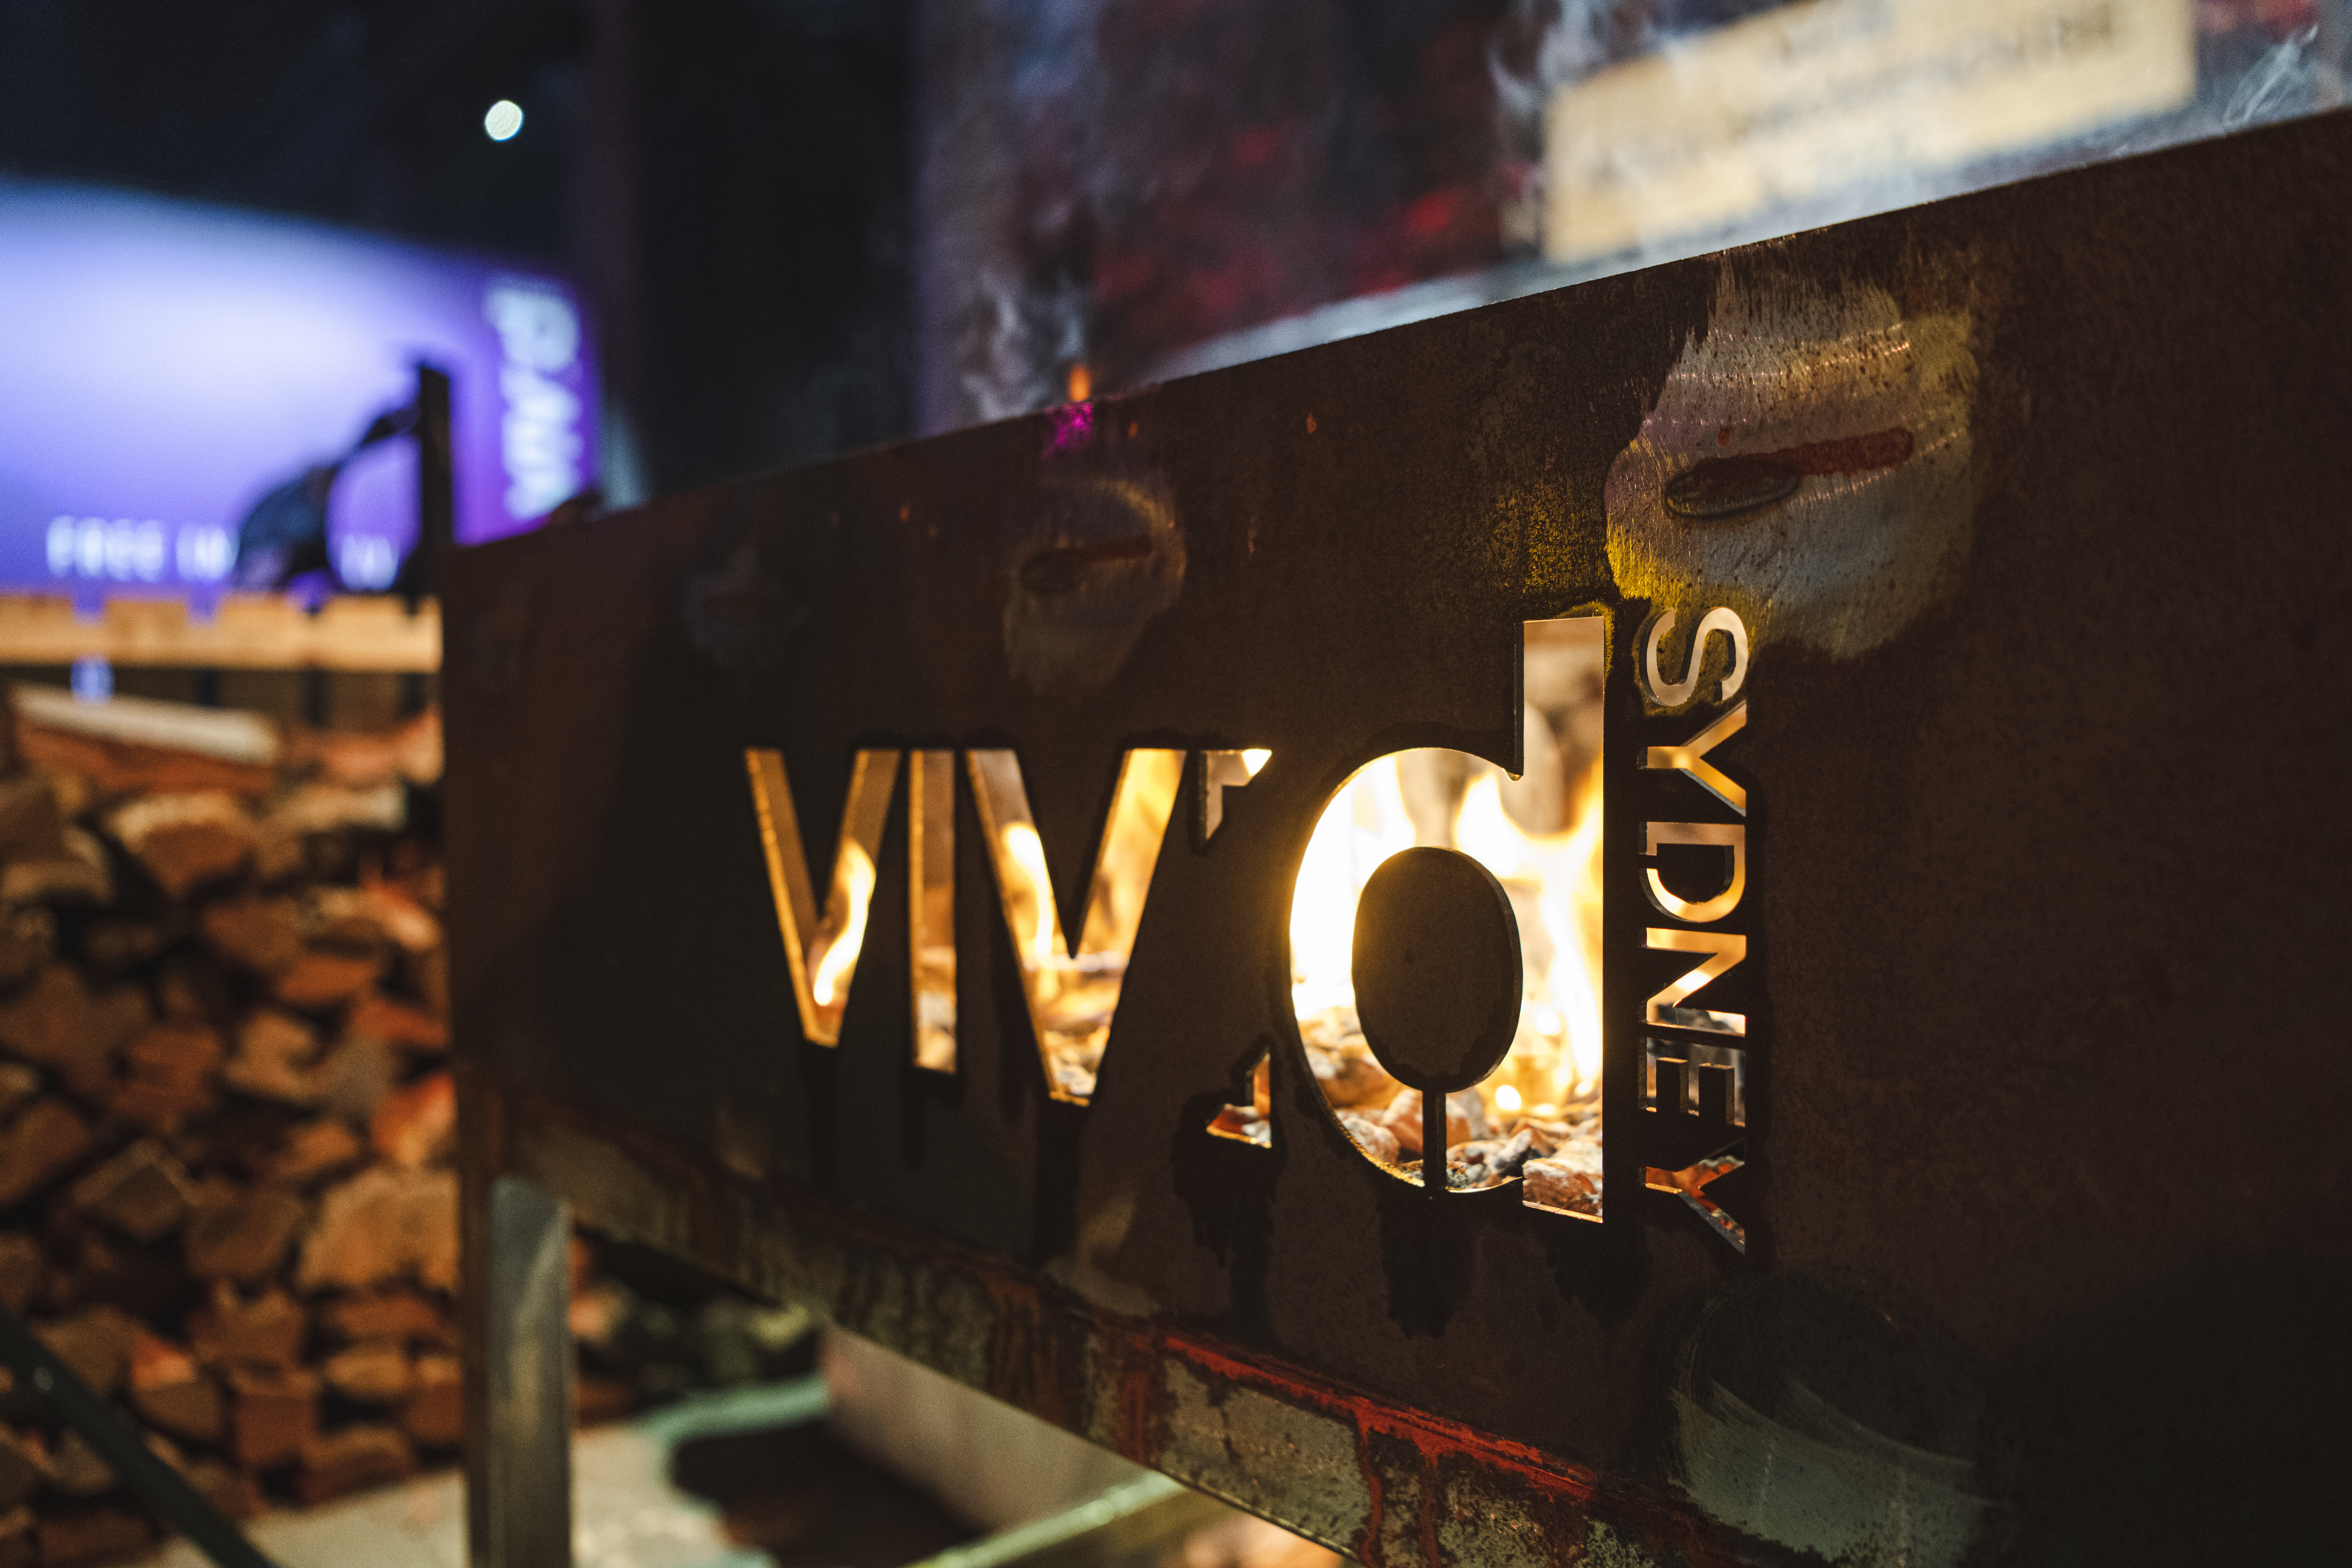 A sign for vivid food, a new aspect of the light show.